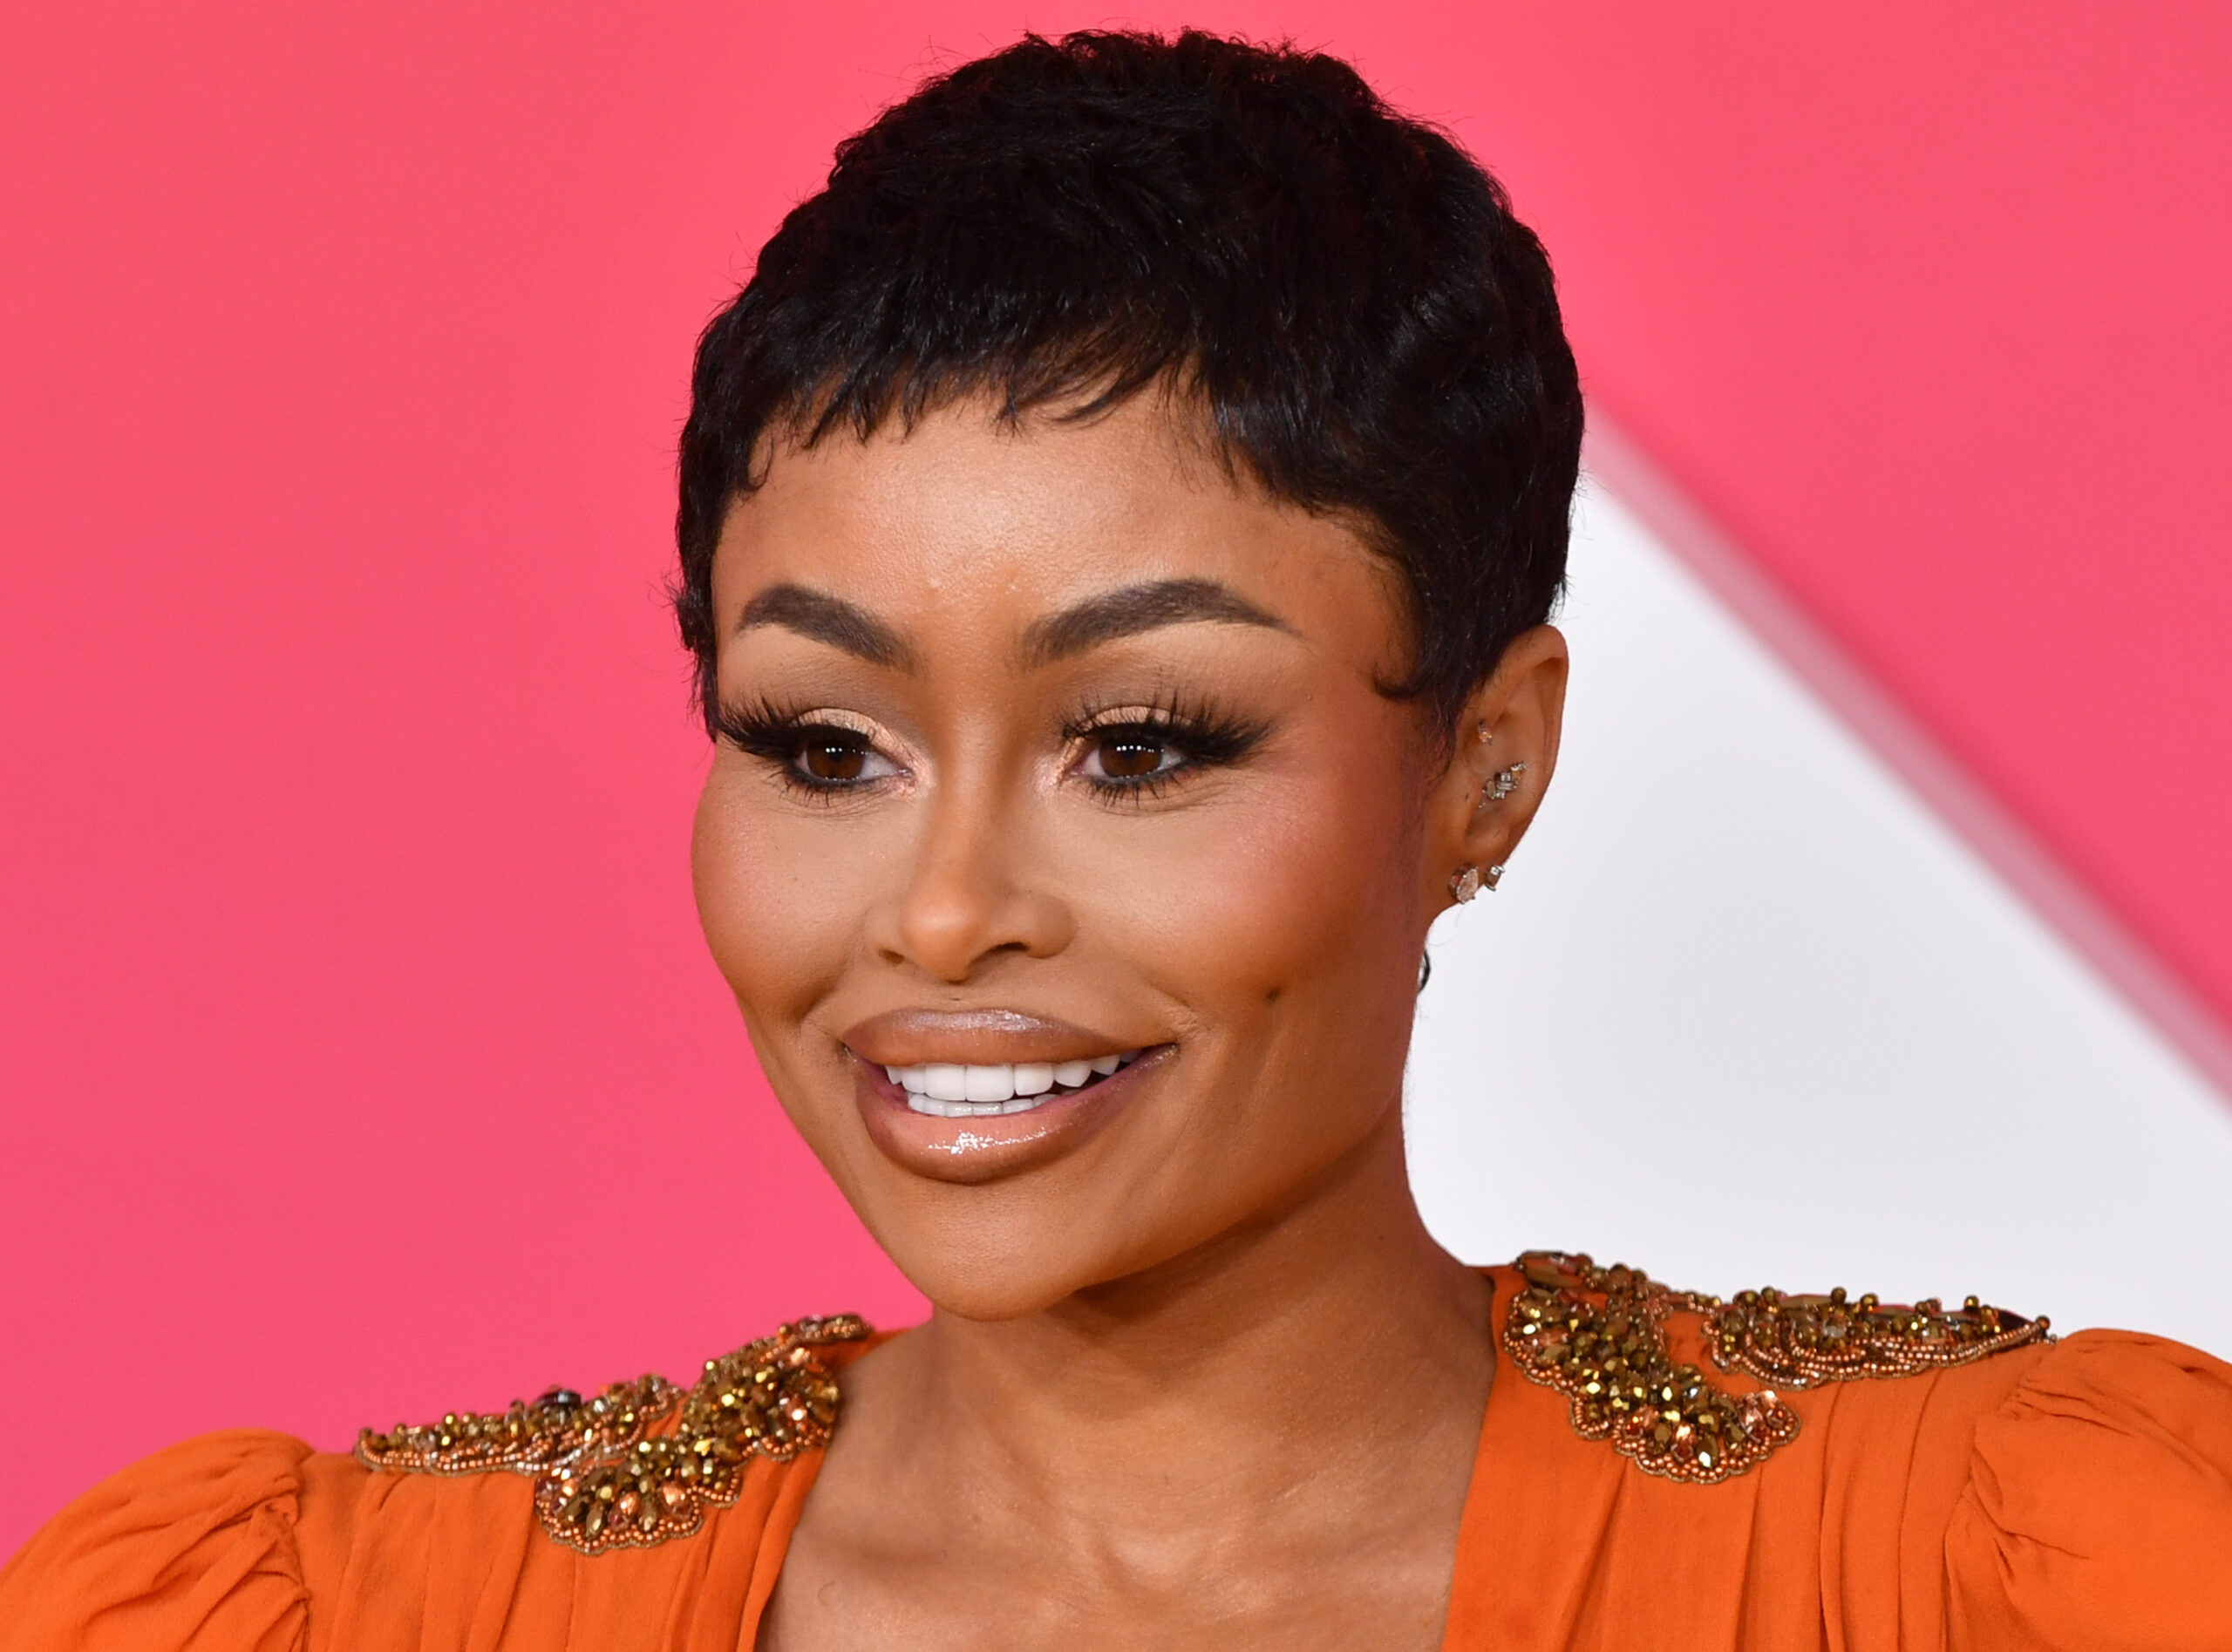 Blac Chyna Posts Video Of Removing ‘Demonic’ Baphomet Tattoo After Conversion To Christianity